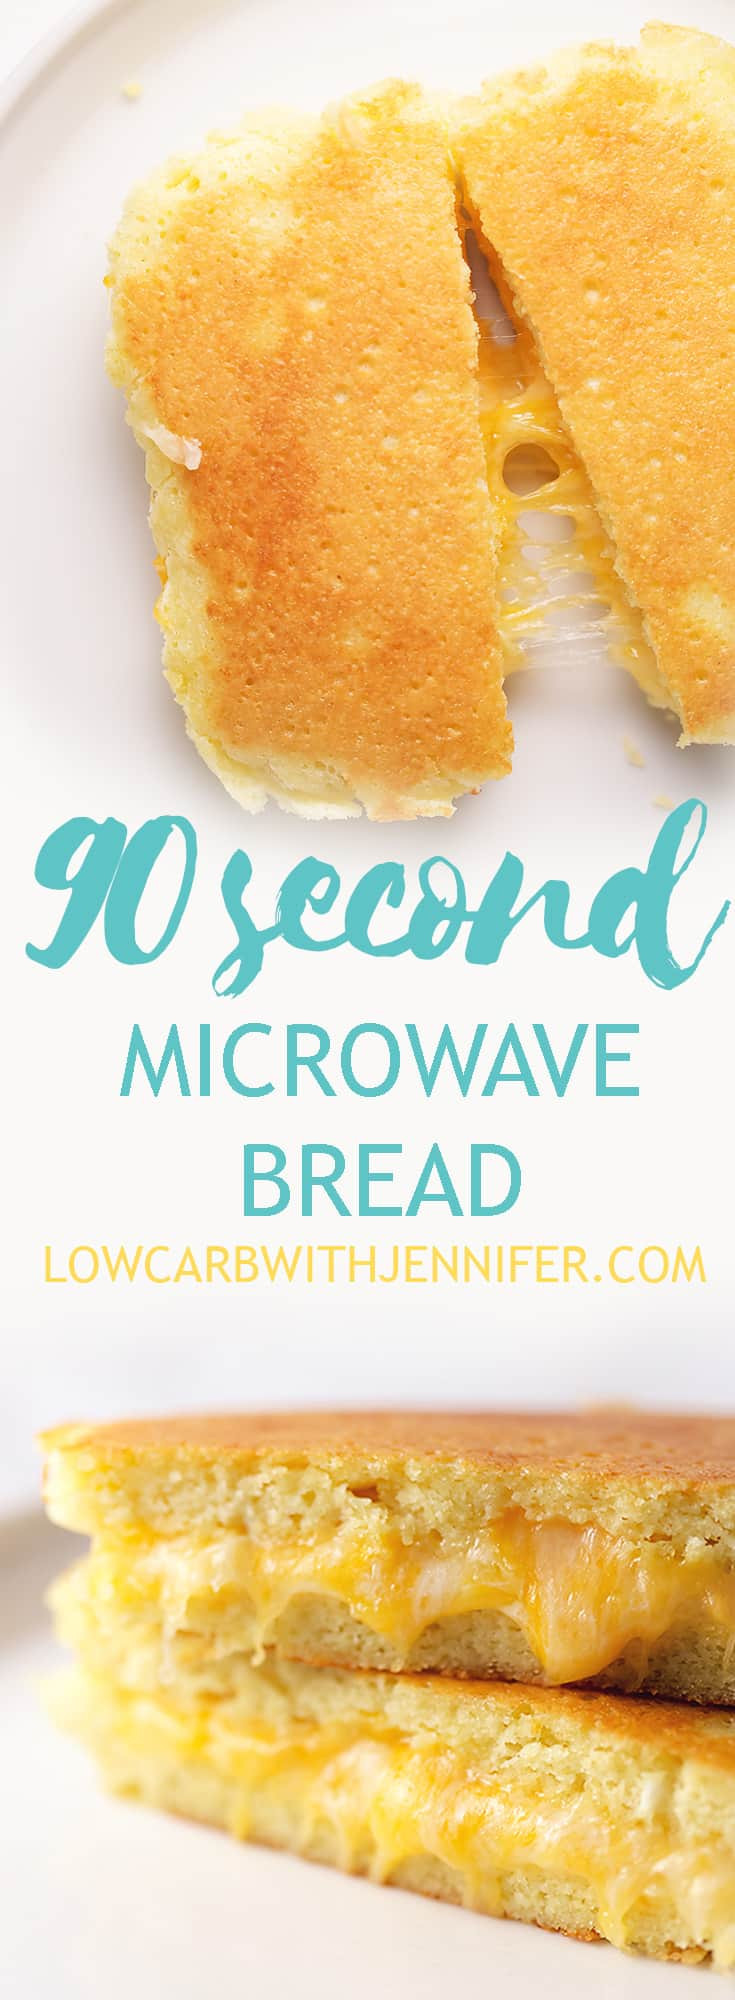 90 Second Keto Bread In A Mug Coconut Flour
 90 Second Microwave Bread with Almond flour or Coconut